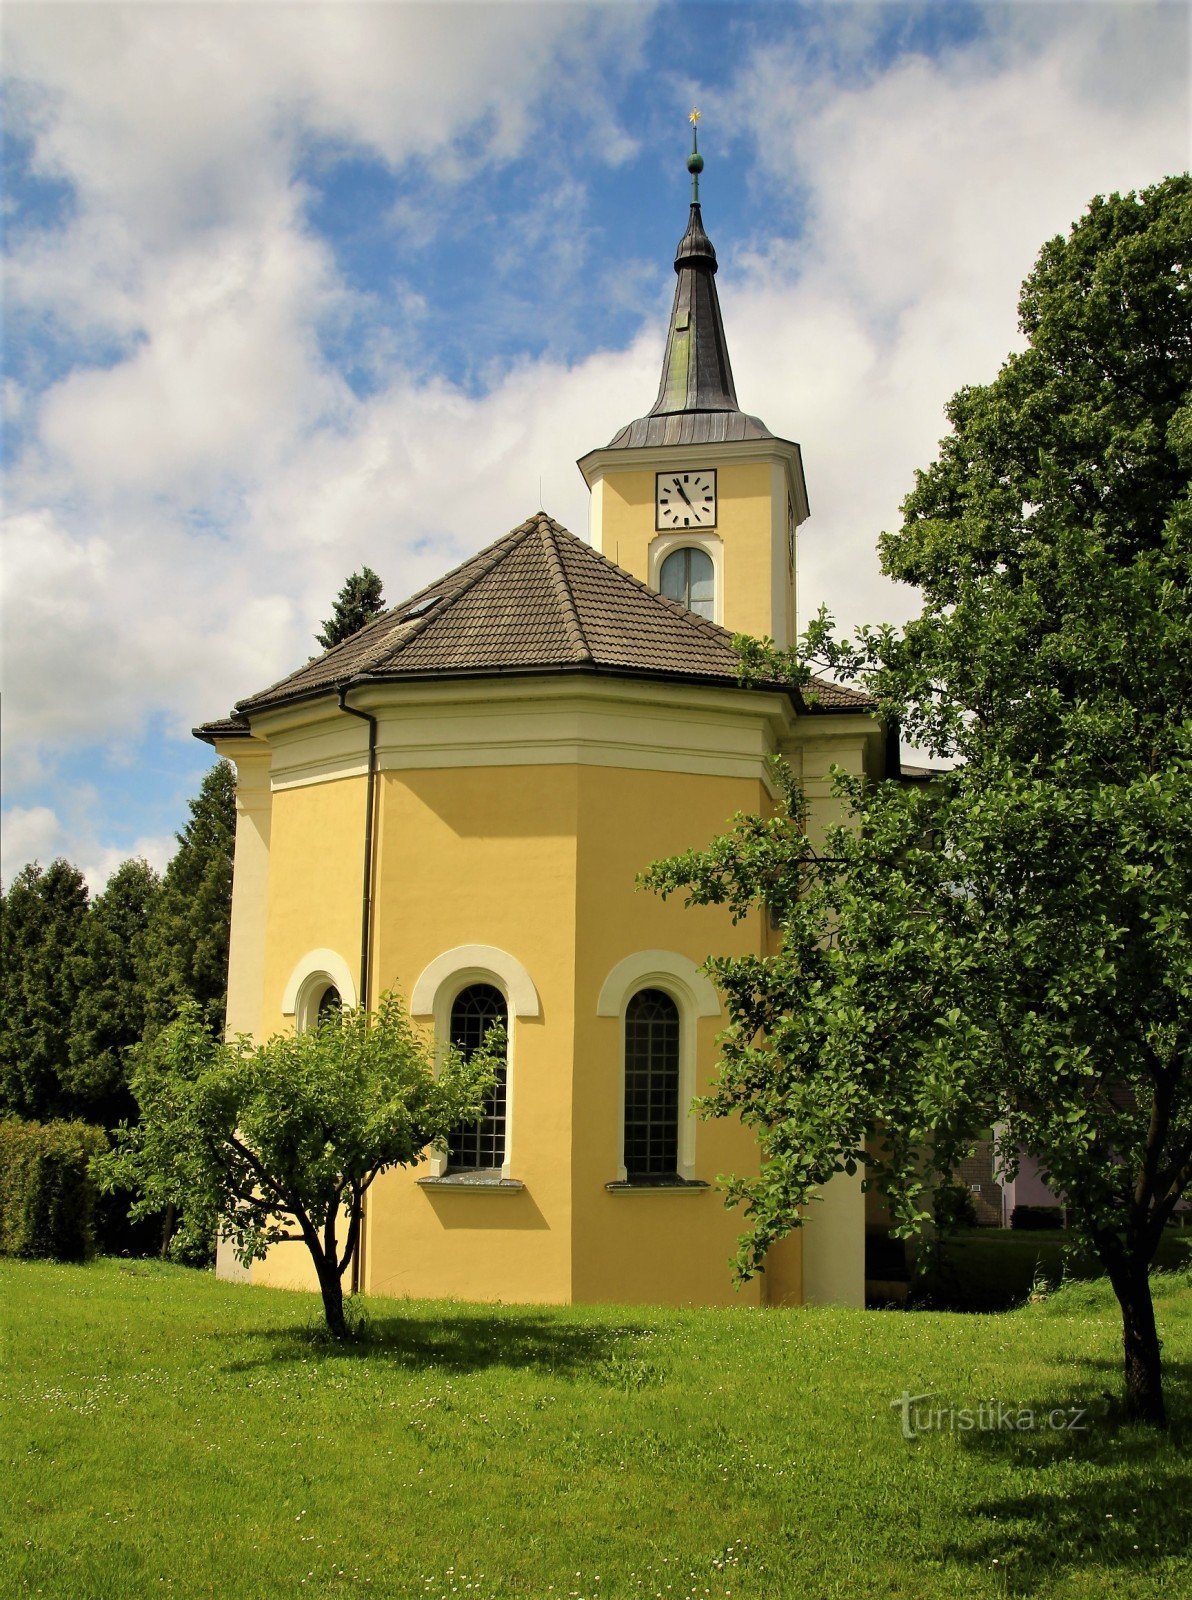 The church as seen from the garden by the cemetery